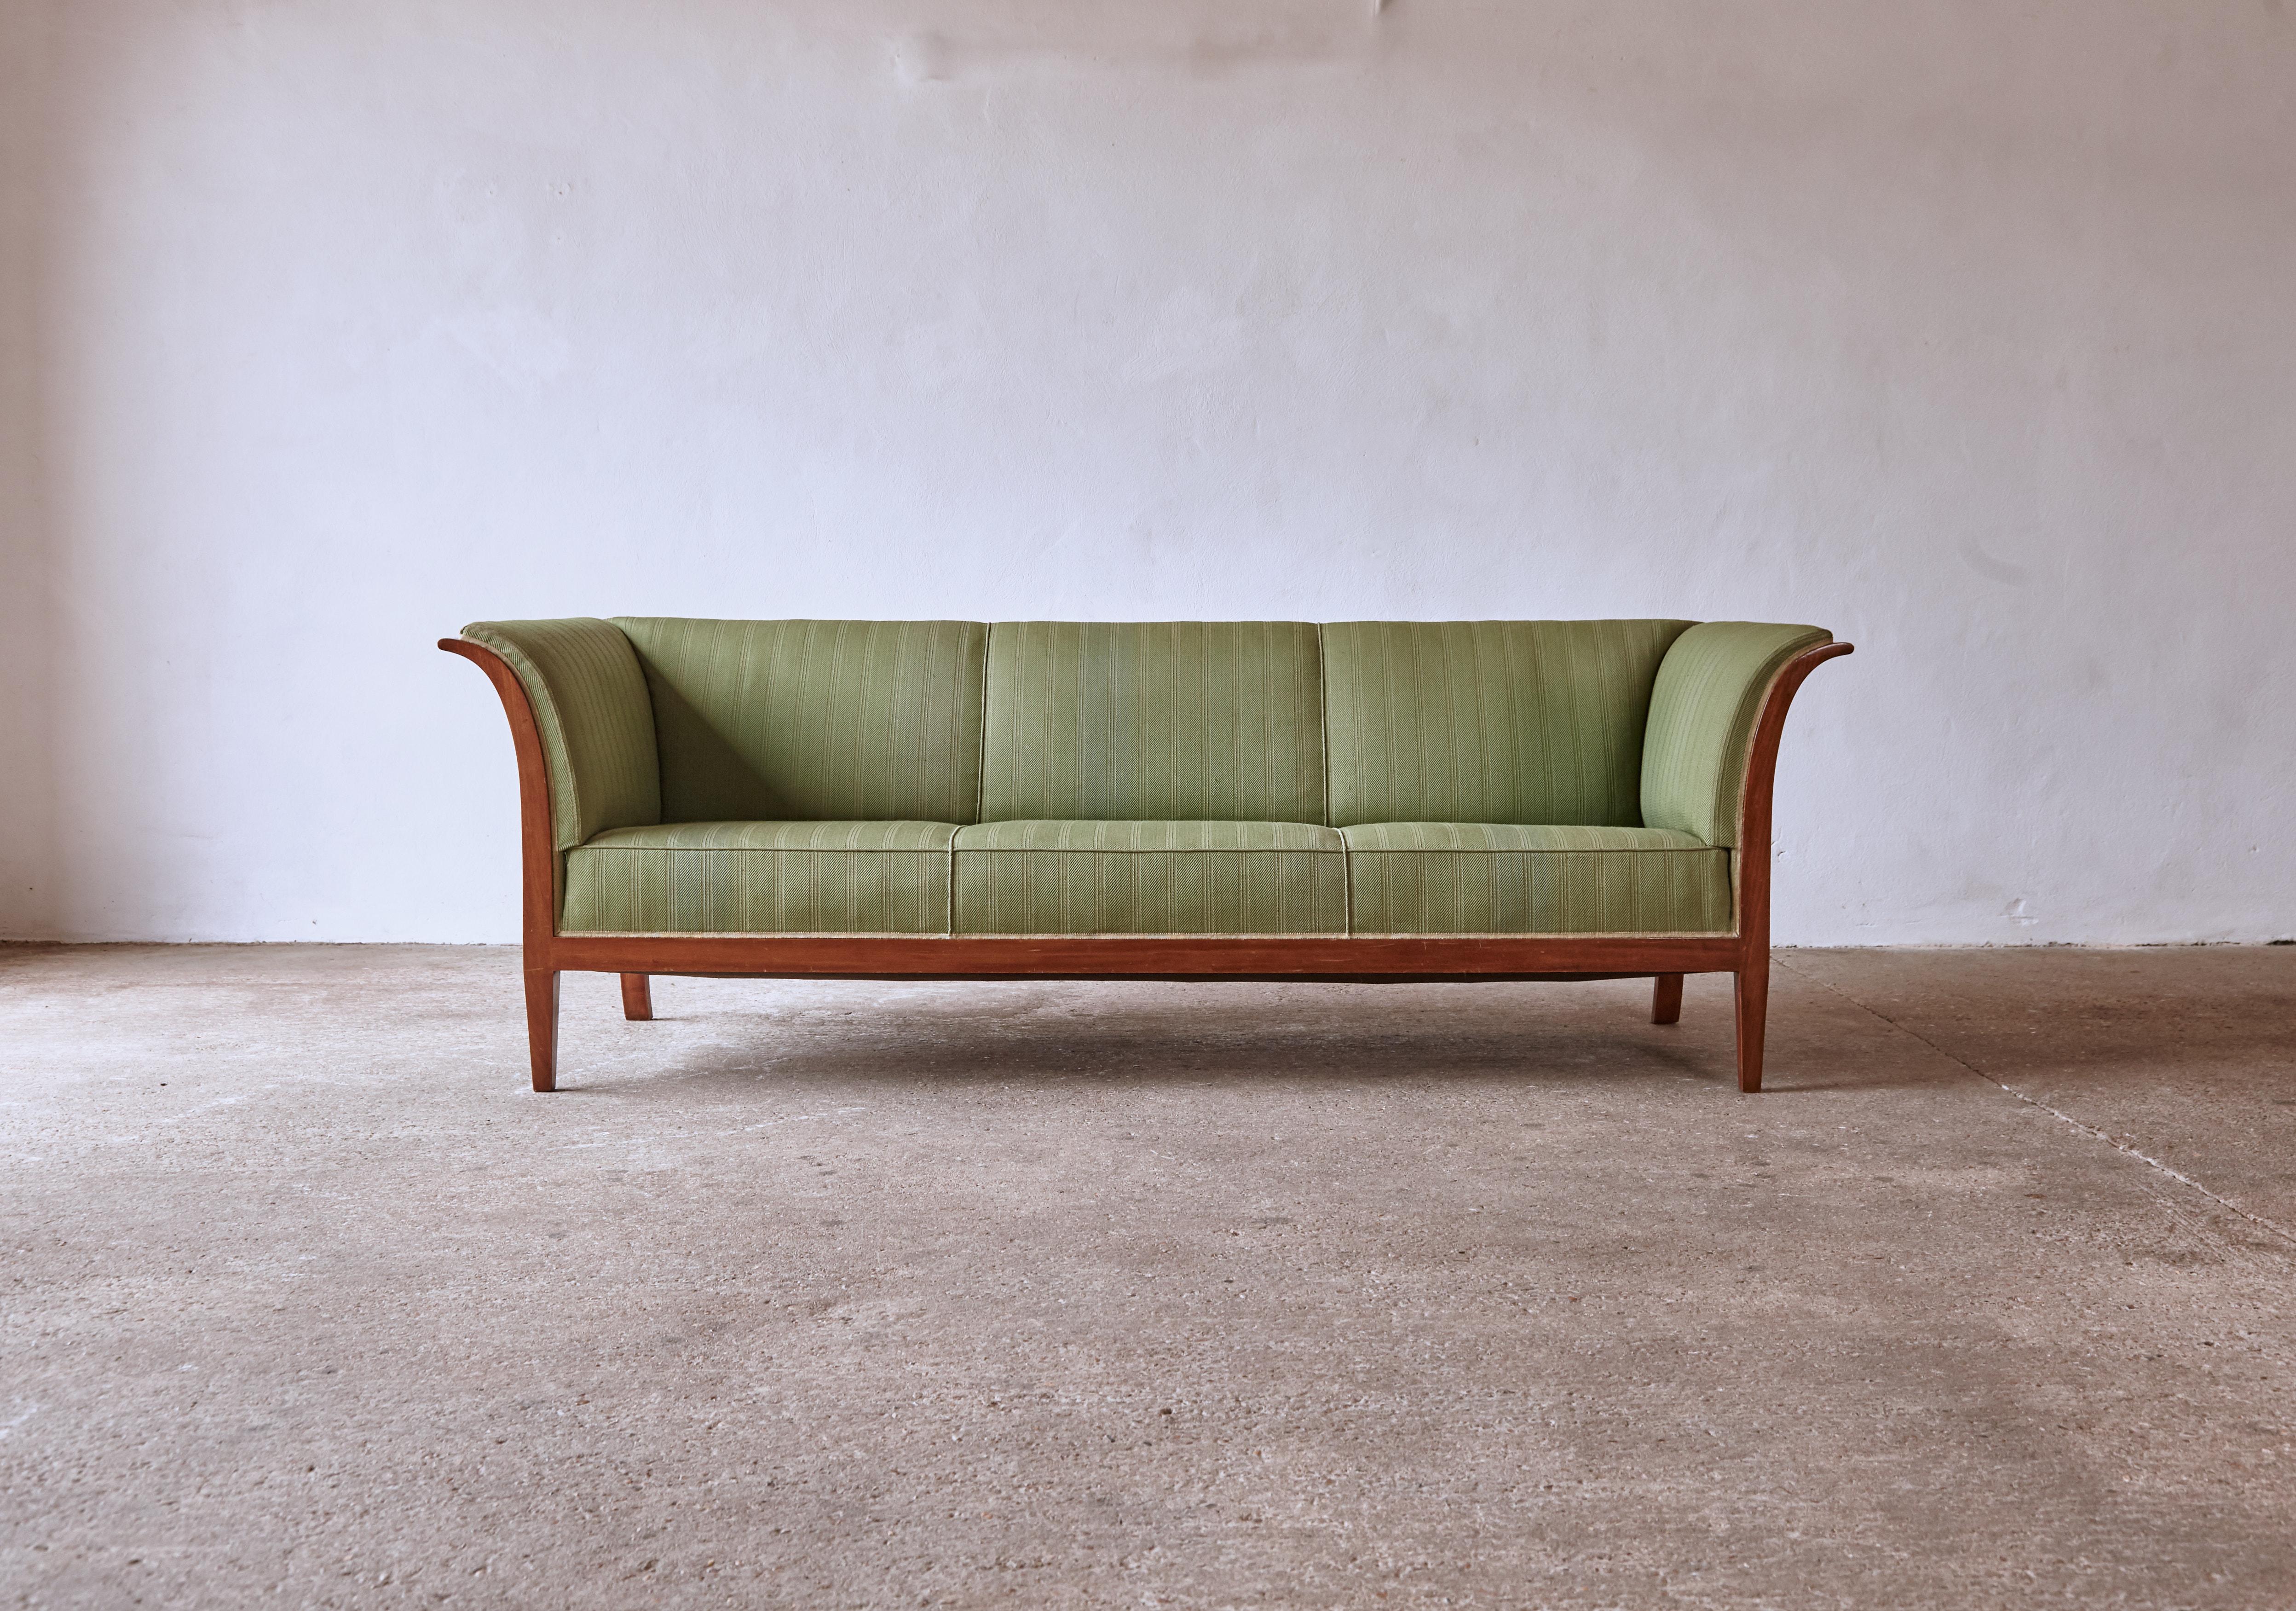 An original Frits Henningsen sofa, Denmark, 1940s-1950s. Designed and produced by Frits Henningsen, Copenhagen. The sofa has presumably been reupholstered at some point in its history but is easy to recover in different fabric if desired. The